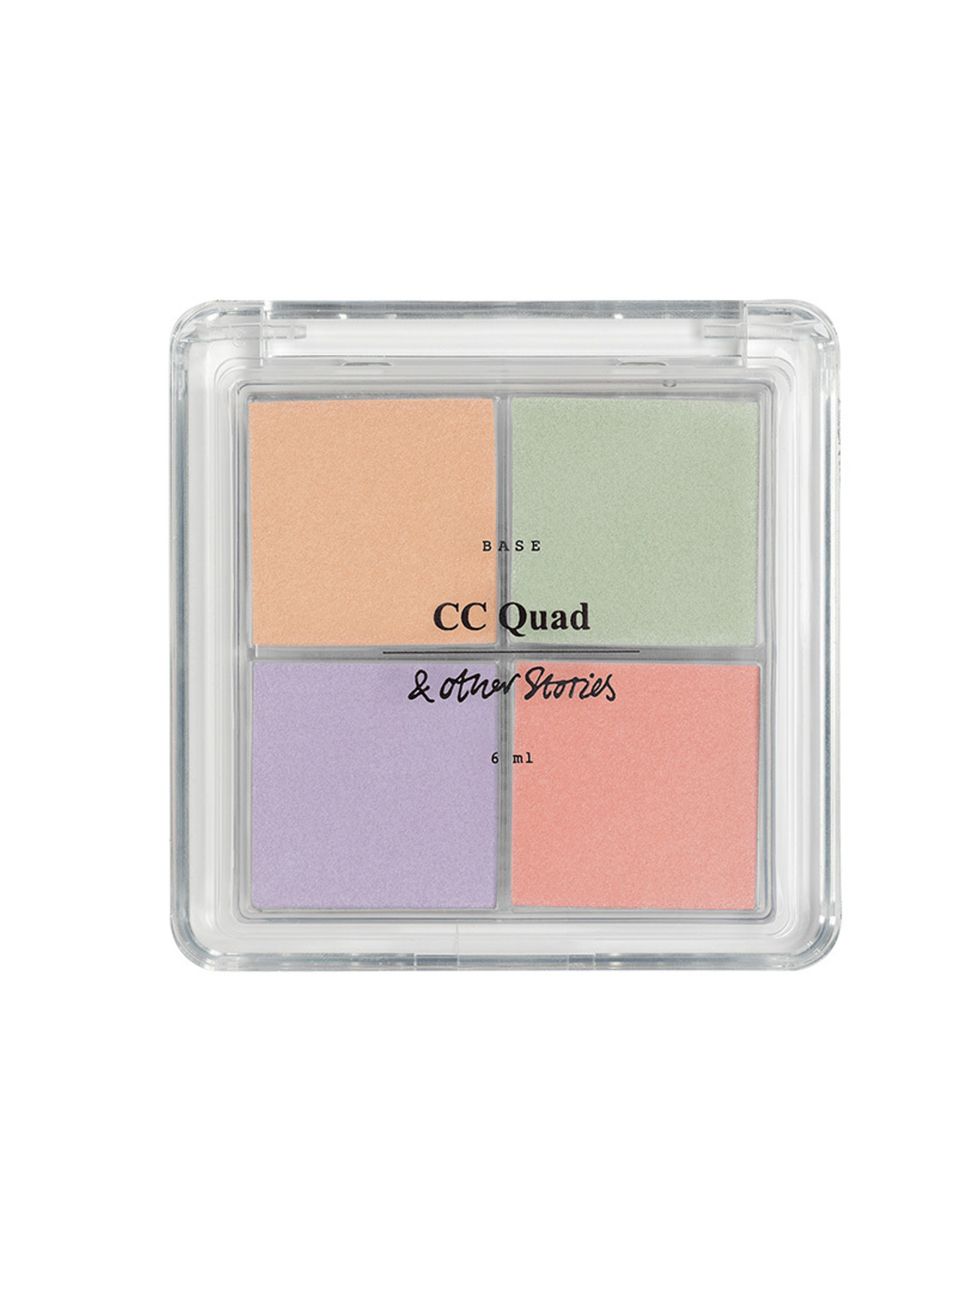 <p><strong><a href="http://www.stories.com/CC_Quad/594756-4023526.1">& Other Stories, CC Quad, £12.00 </a></strong></p><p>A palette that cuts through the alphabetical skincare confusion, this is basically all you need to create a great base. Dont be put 